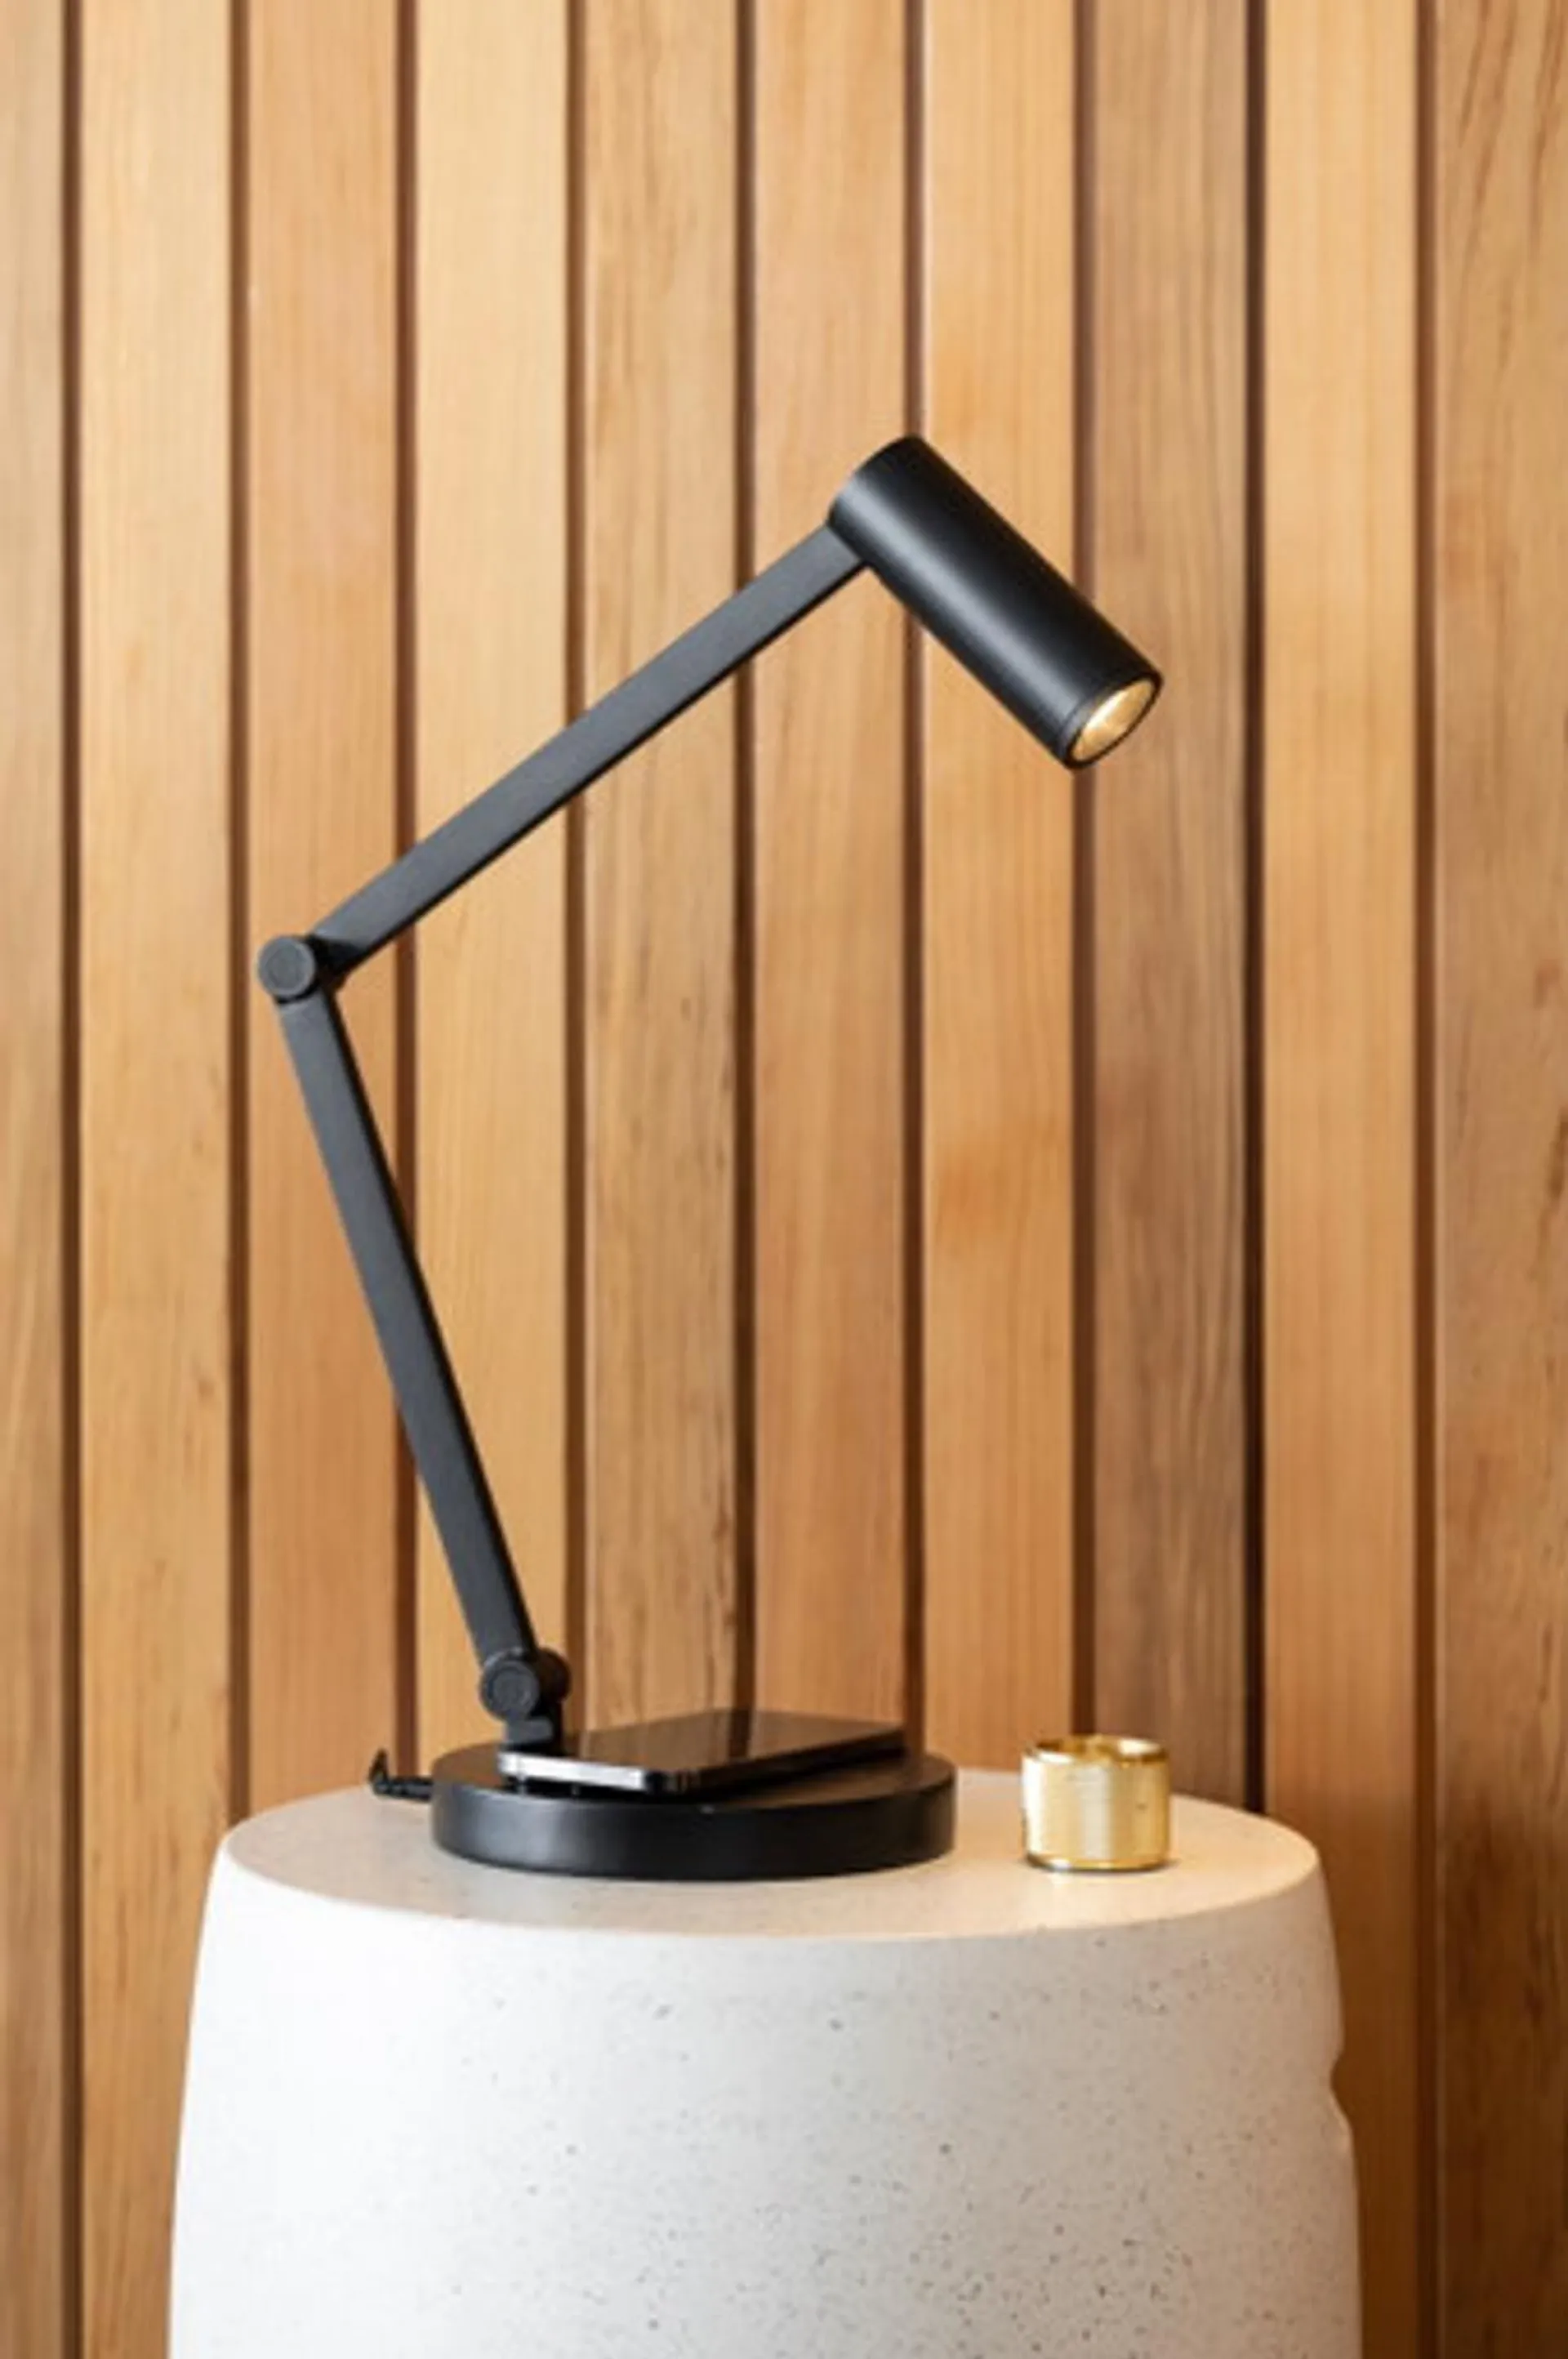 Connor LED Table Lamp Black